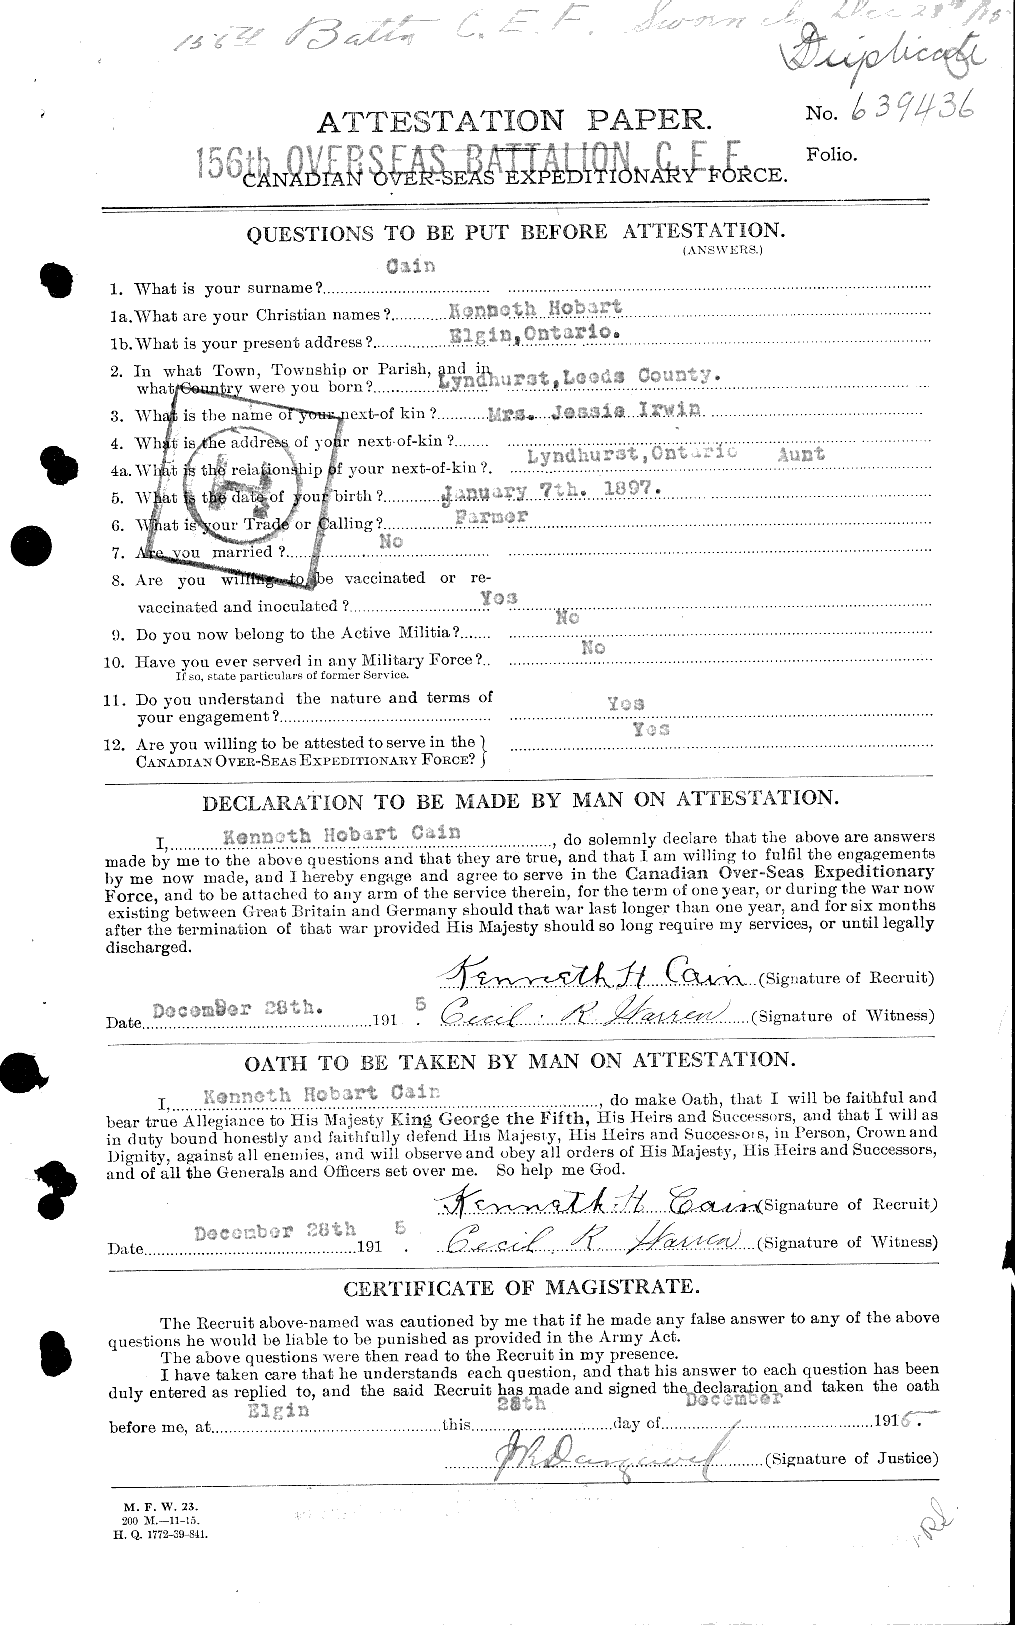 Personnel Records of the First World War - CEF 001755a